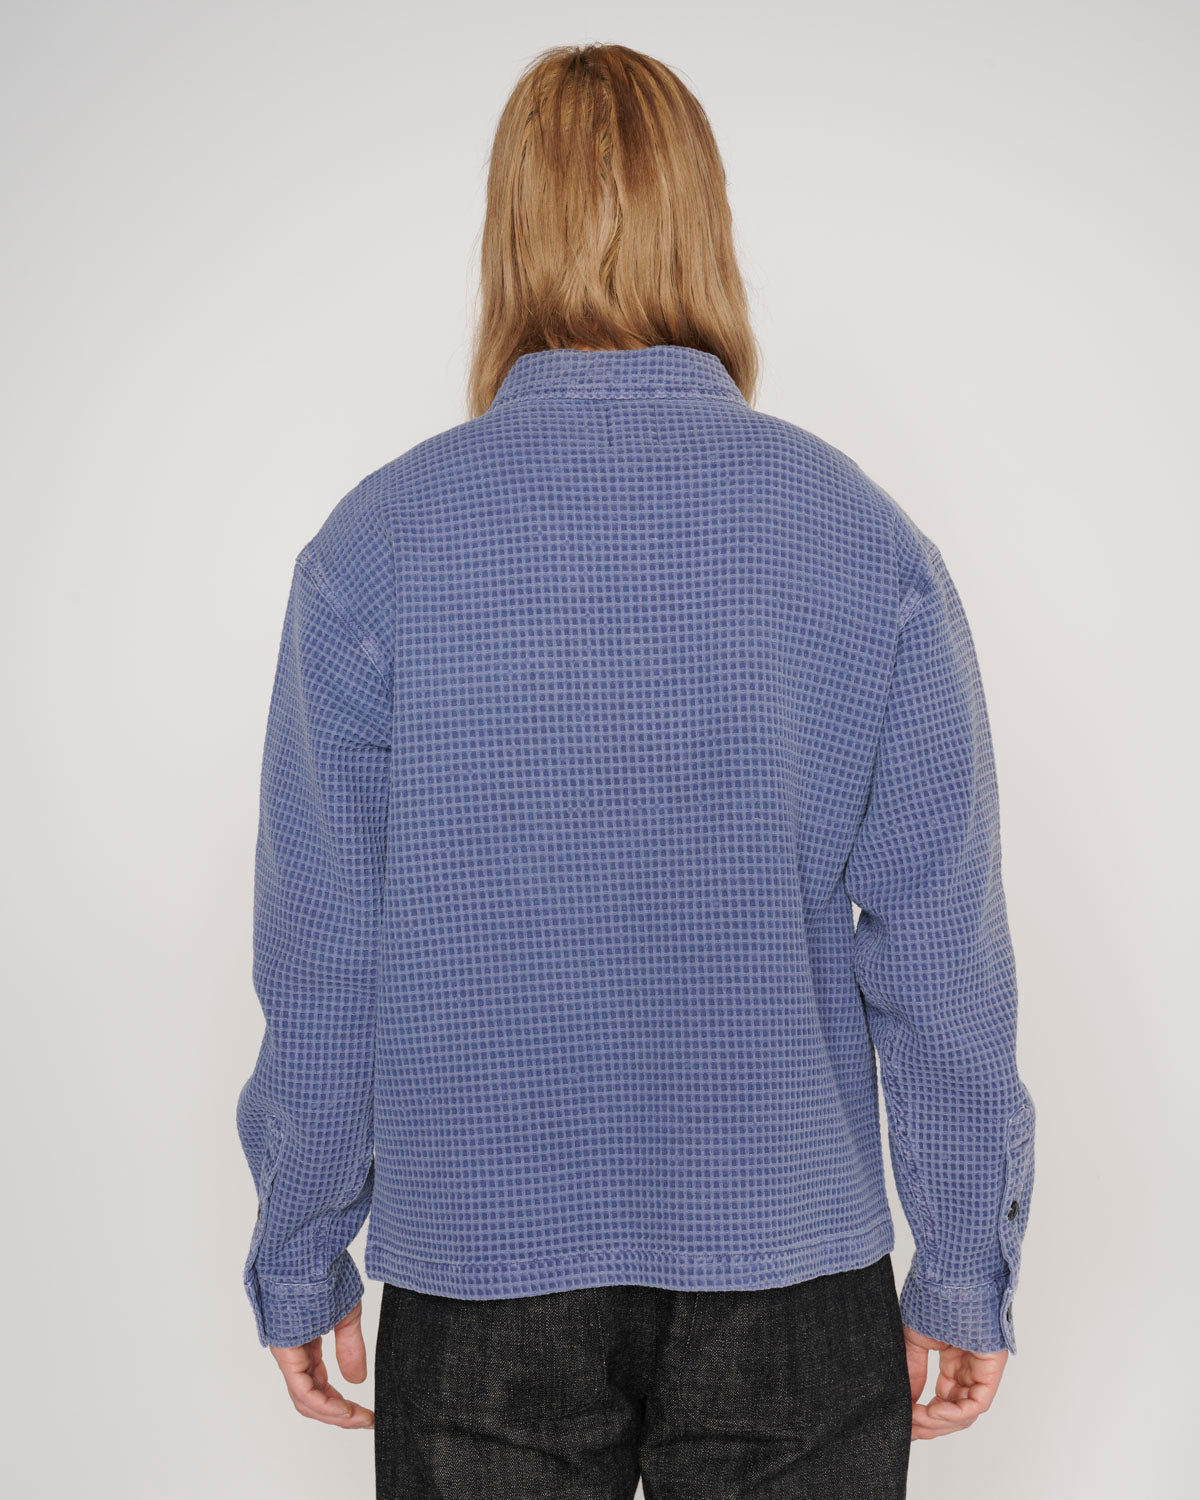 Waffle Button Front Shirt - Blueberry 3